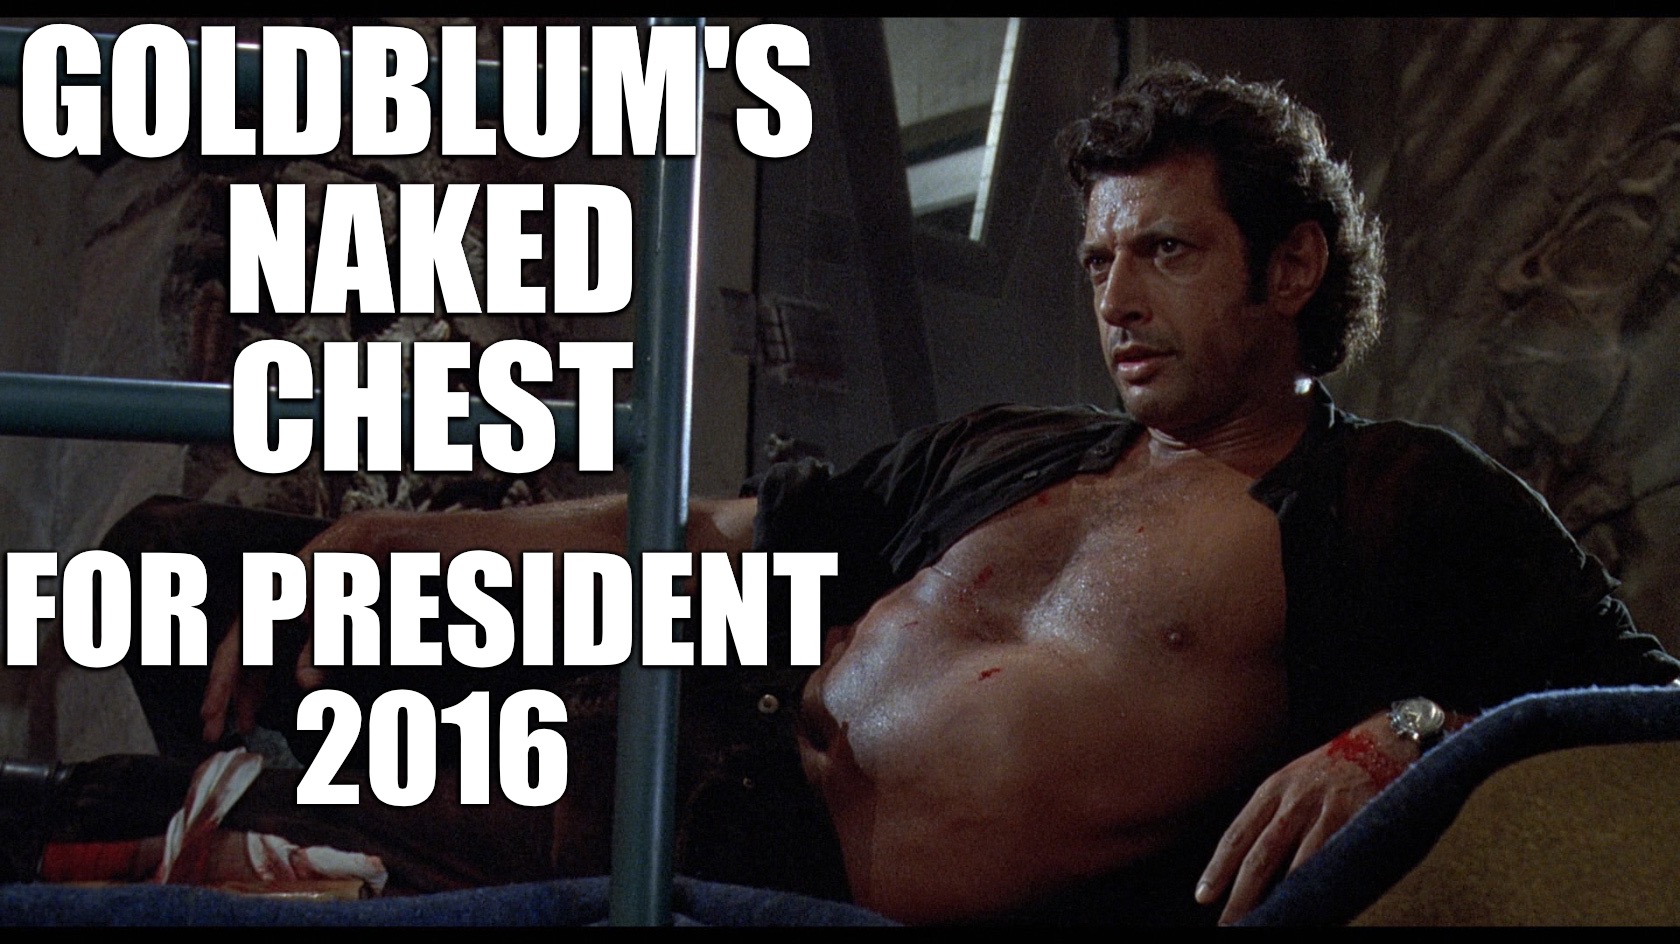 Jeff Goldblum Says He Admires The Memes Made From His Chest In